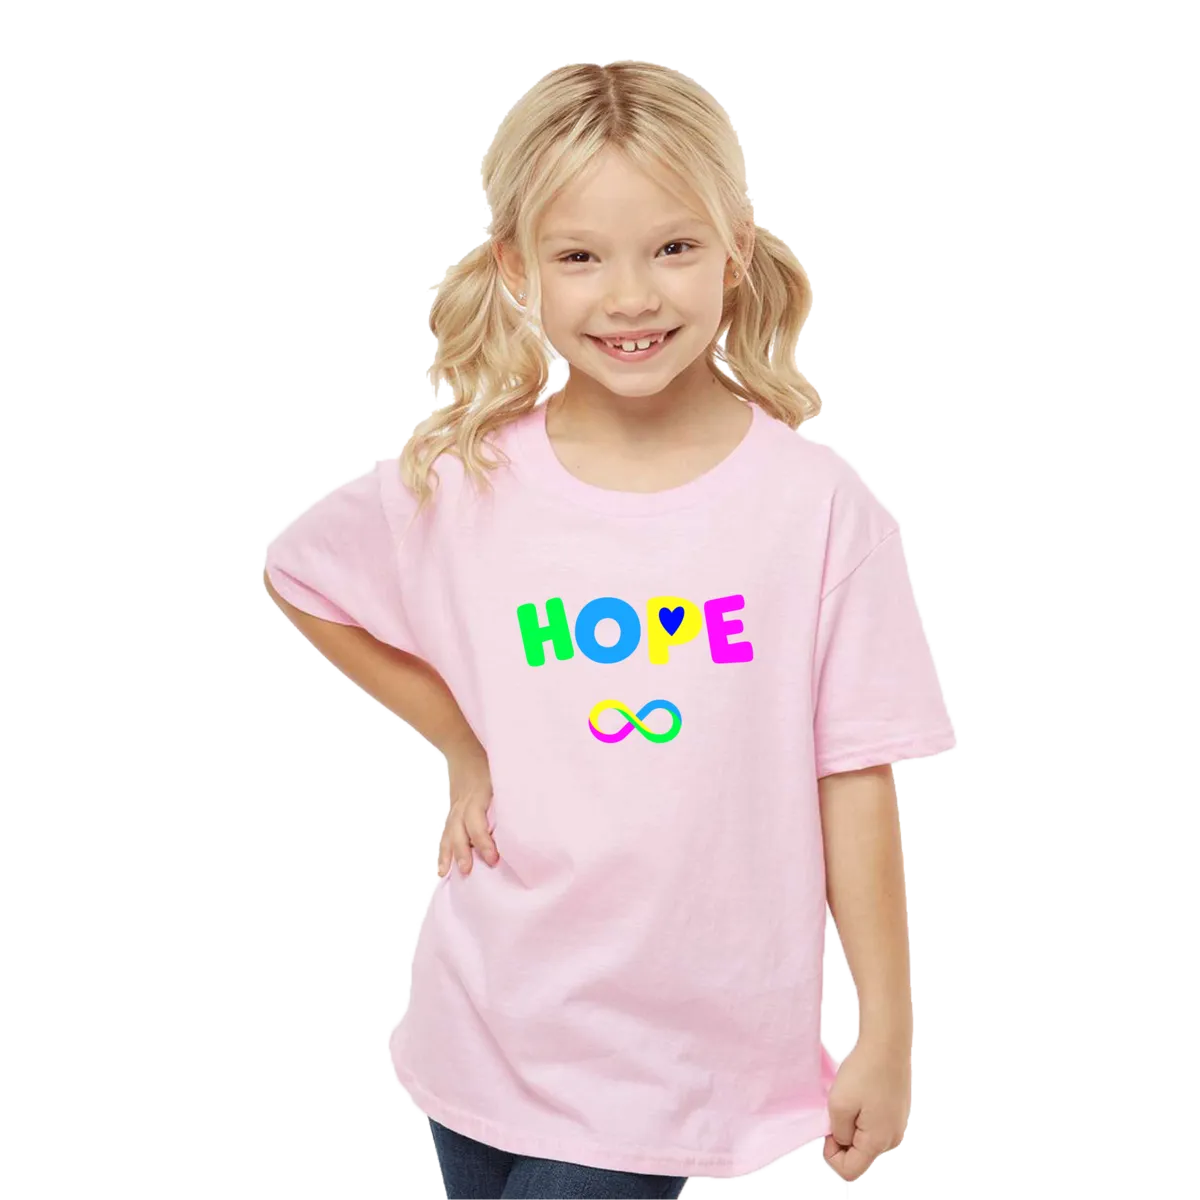 Hope Shines Bright - Youth 